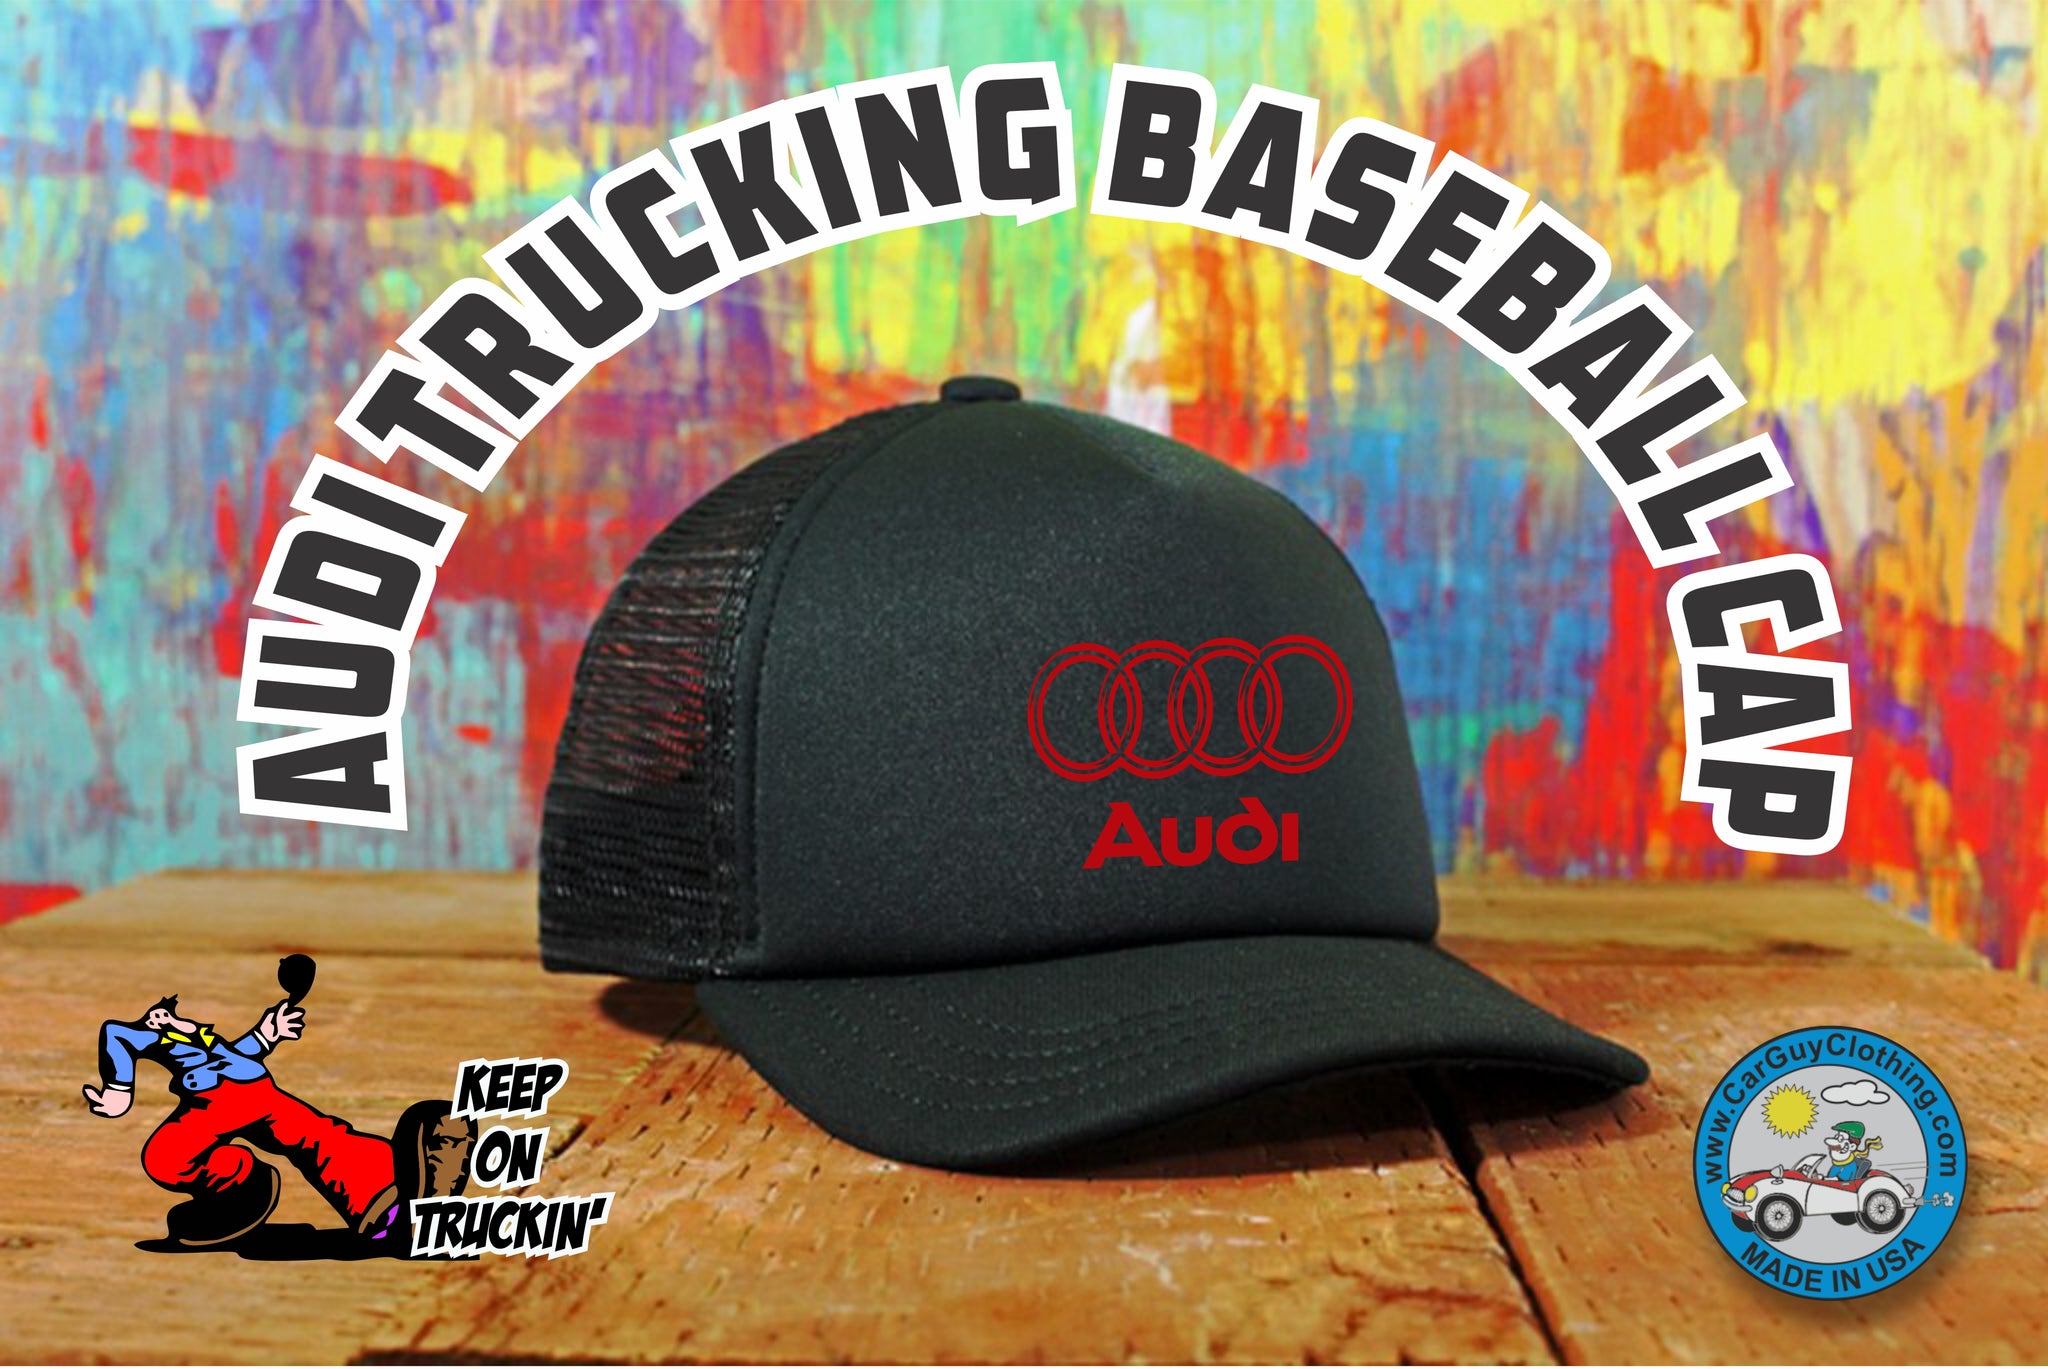 Genuine Audi Collection Hats